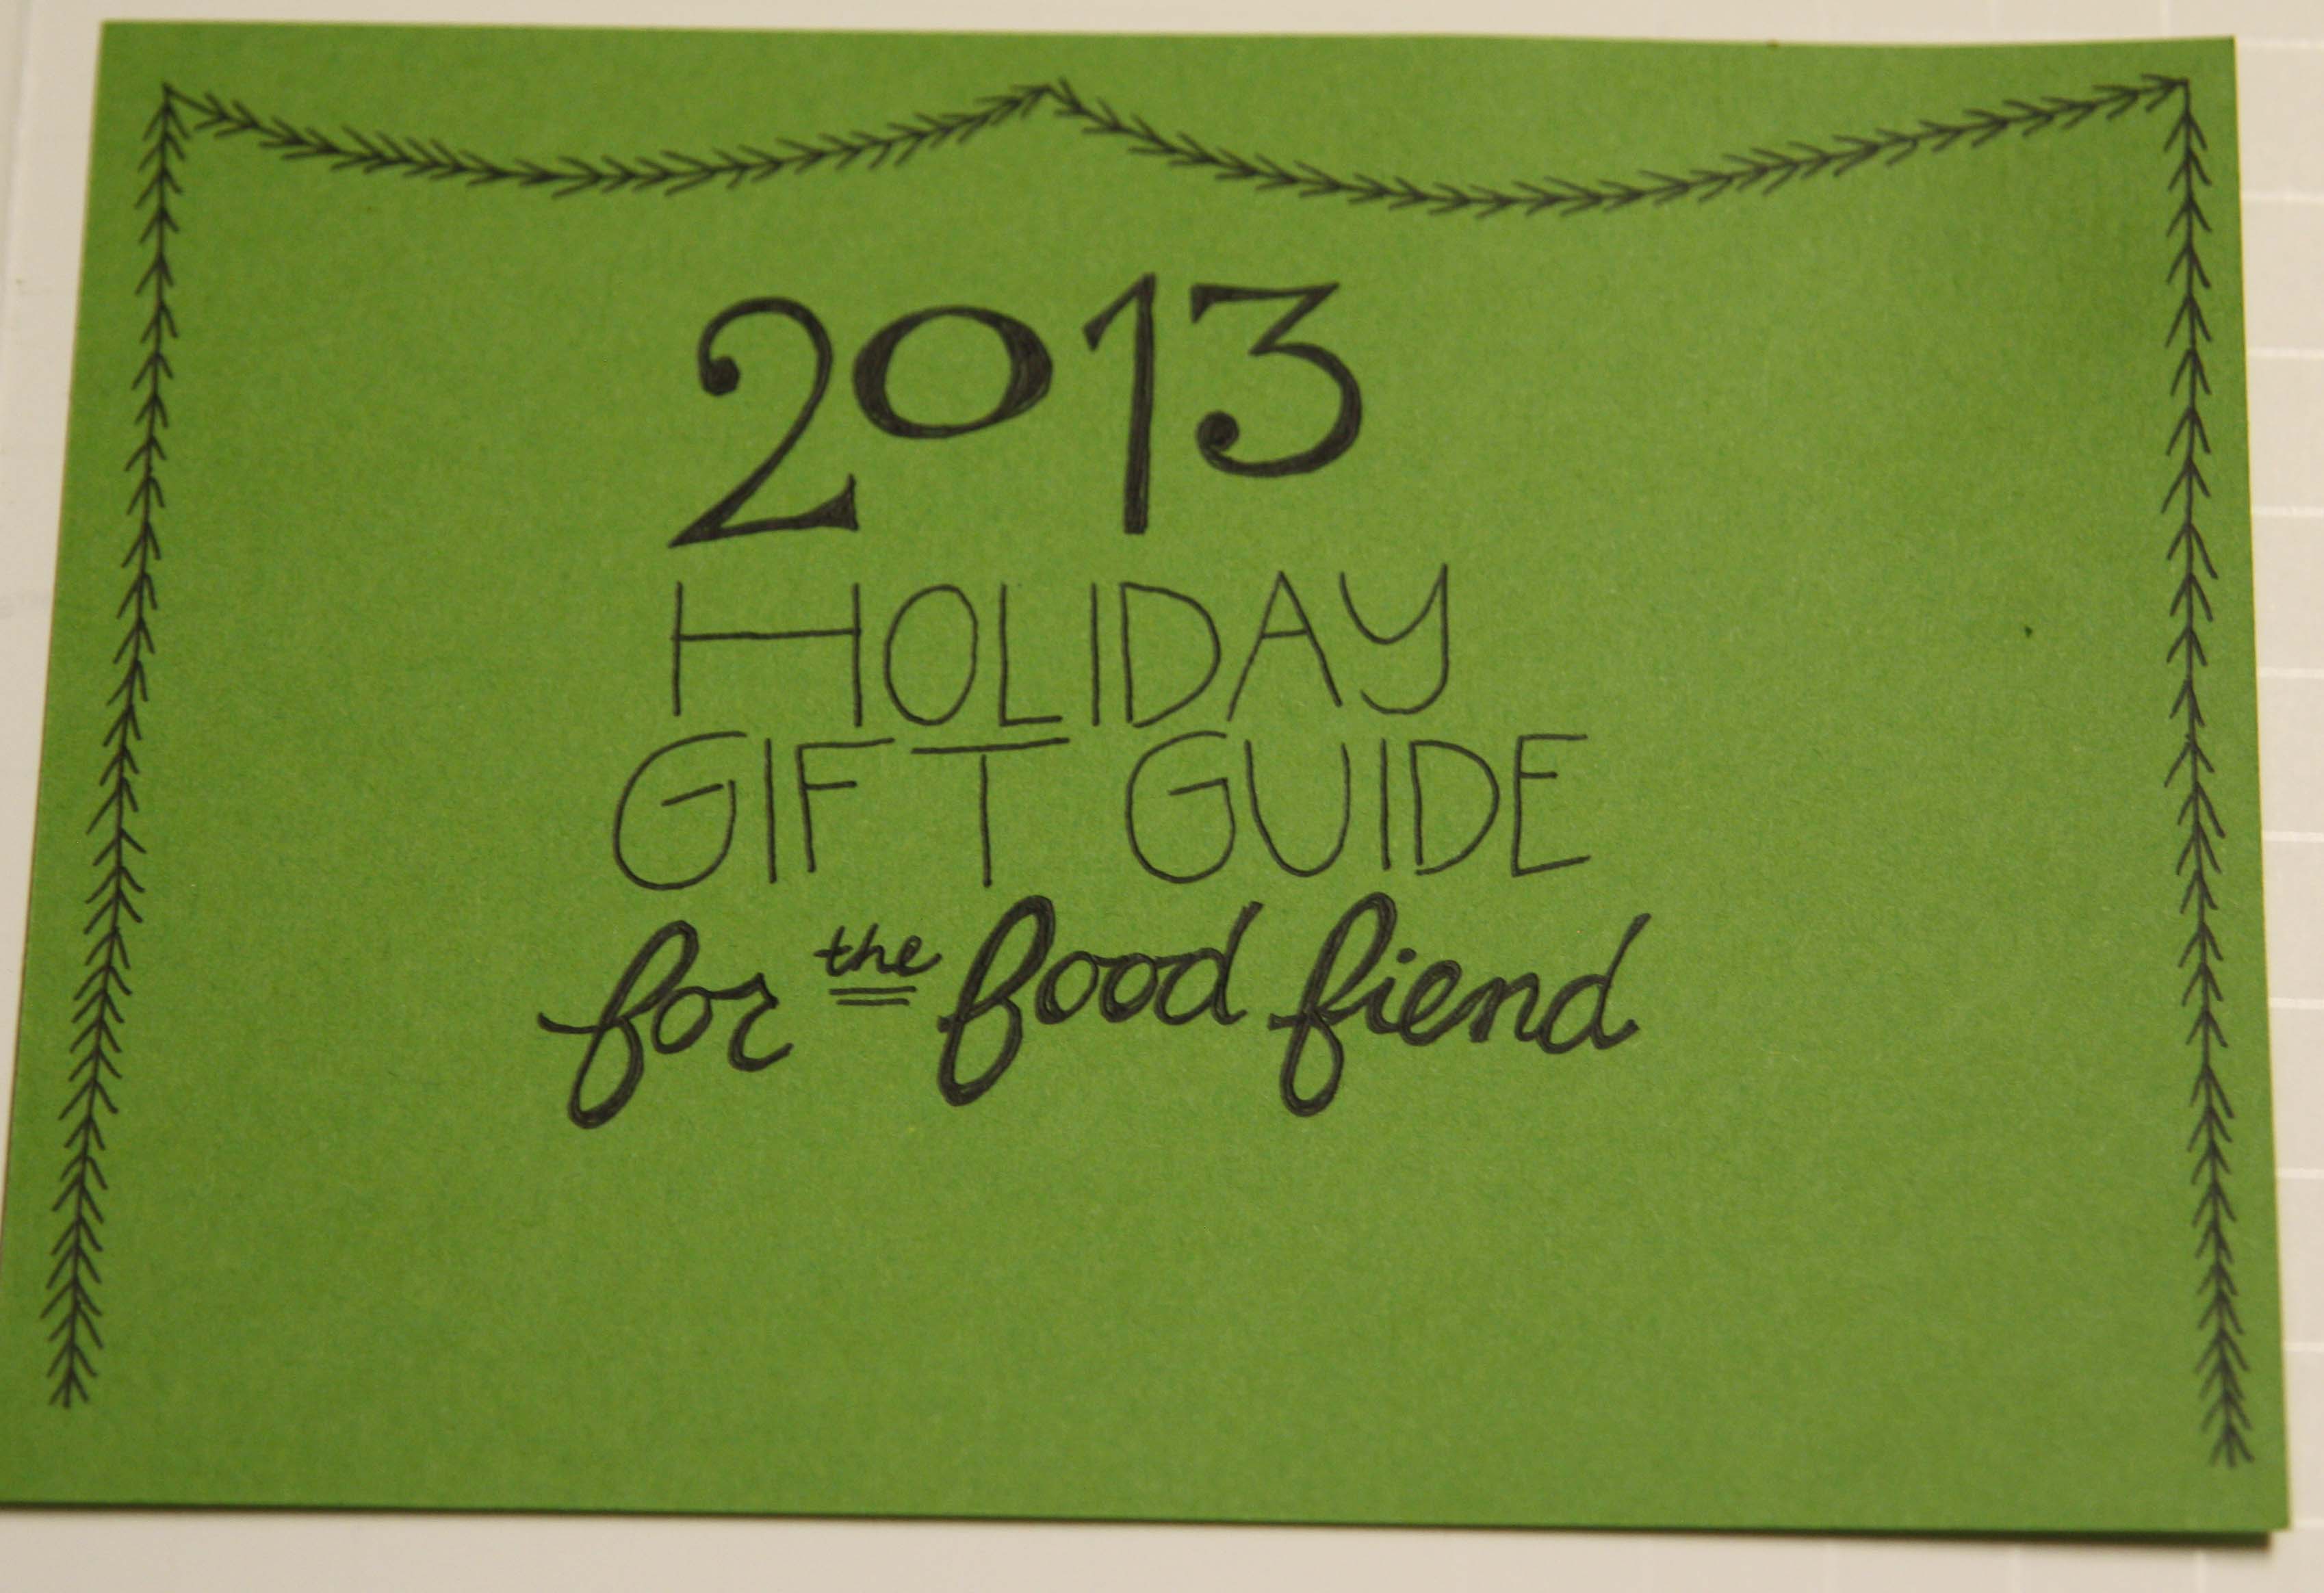 holiday gift guide 2013 header